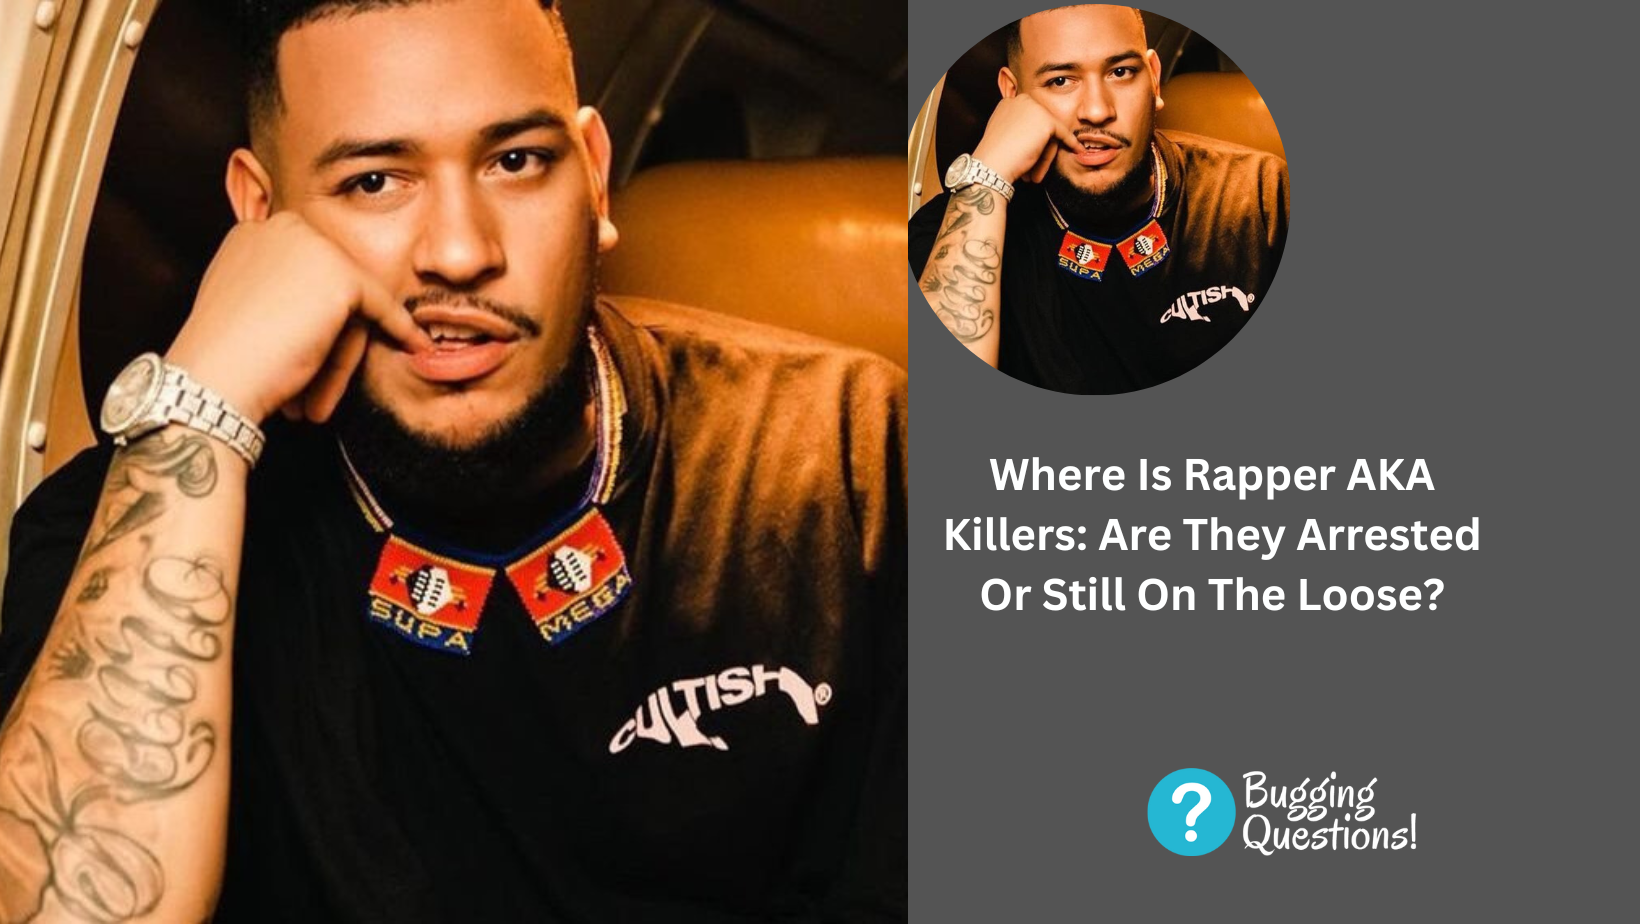 Where Is Rapper AKA Killers: Are They Arrested Or Still On The Loose?